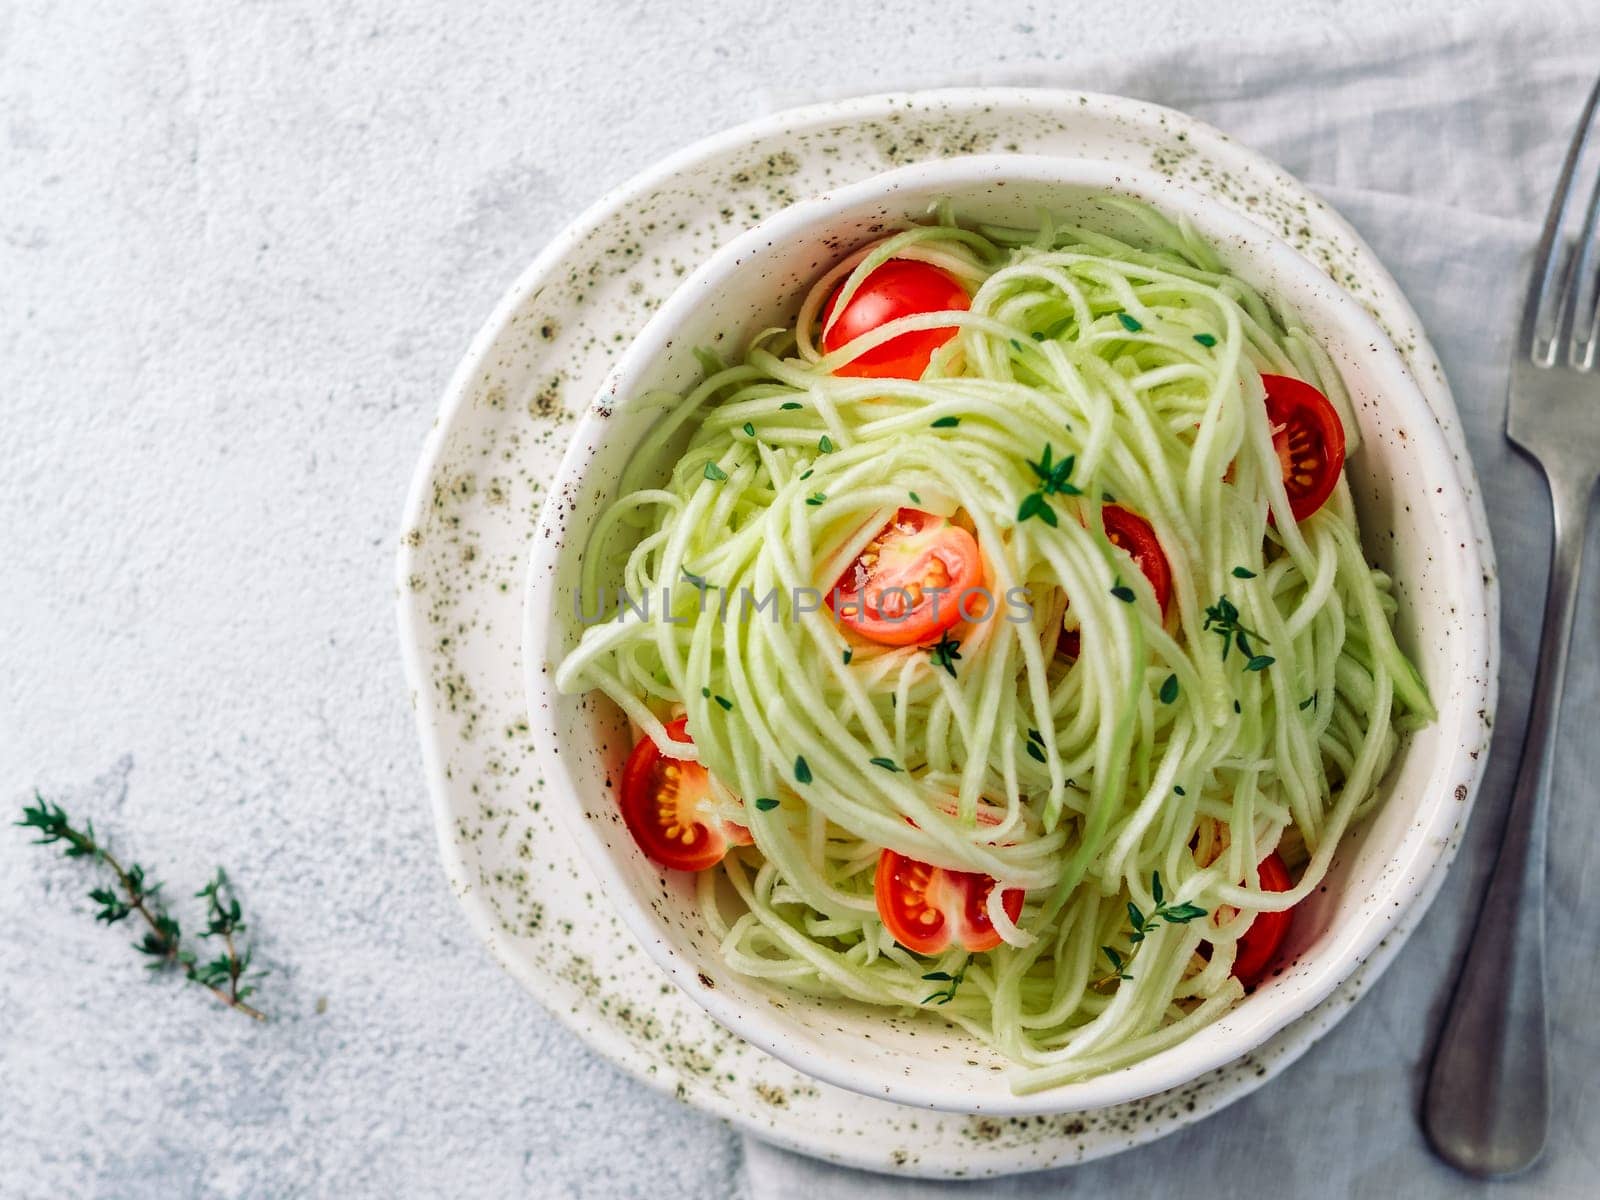 Zucchini noodles salad with cherry tomatoes. Vegetable noodles - green zoodles or courgette spaghetti salad ready-to-eat. Clean eating, raw vegetarian food concept. Copy space. Top view or flat lay.